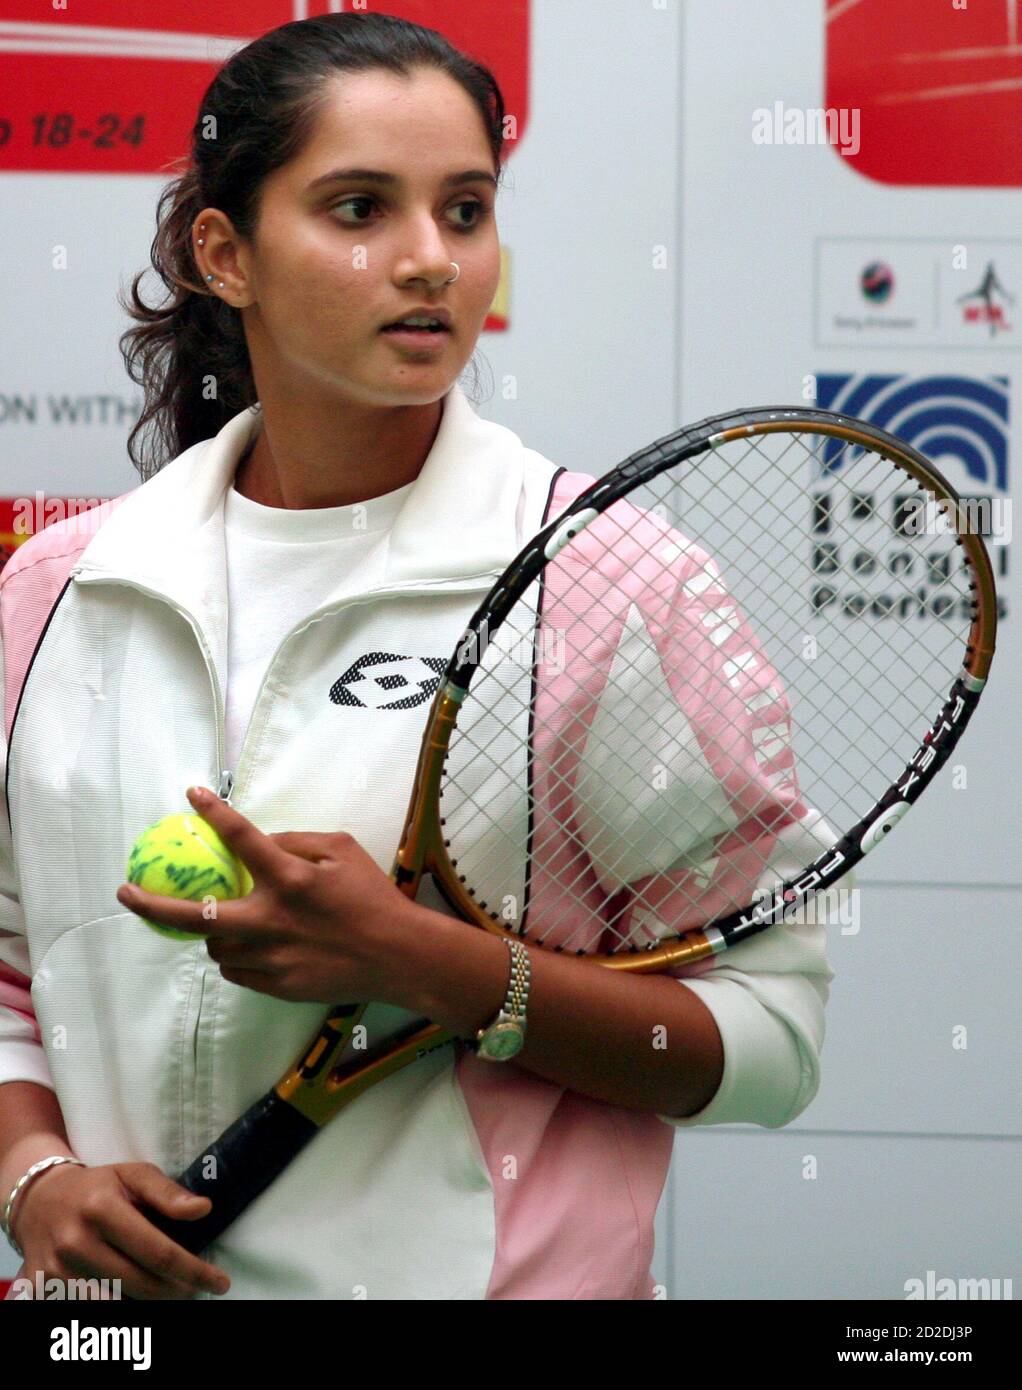 India's tennis player Sania Mirza attends a promotional event for the  upcoming WTA tennis tournament during a function in Mumbai September 14,  2006. The WTA tennis tournament will take place in the